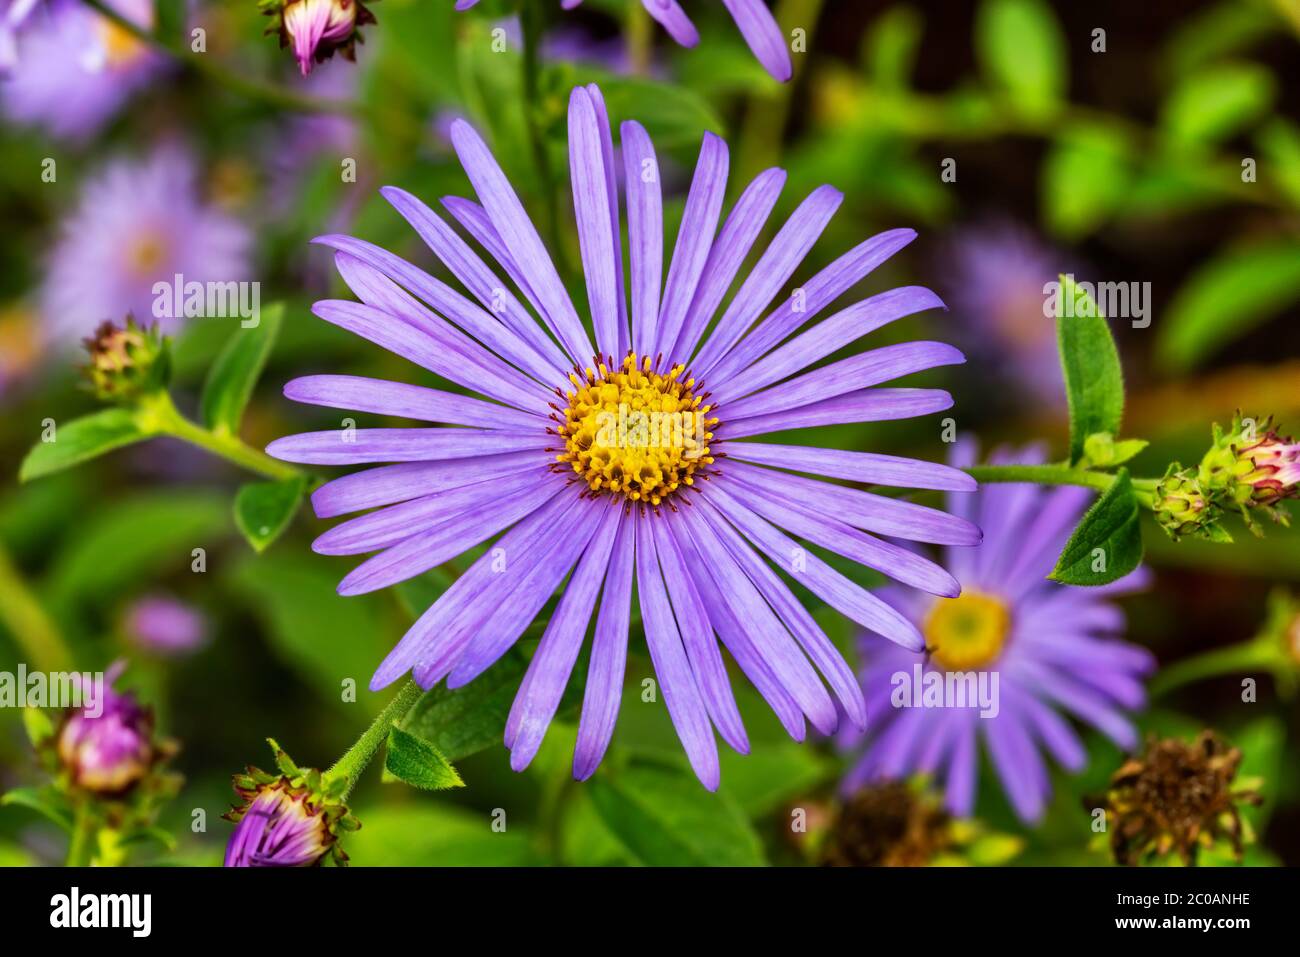 Aster x frikartii 'Monch' a lavender blue herbaceous perennial summer autumn flower plant commonly known as michaelmas daisy stock photo Stock Photo